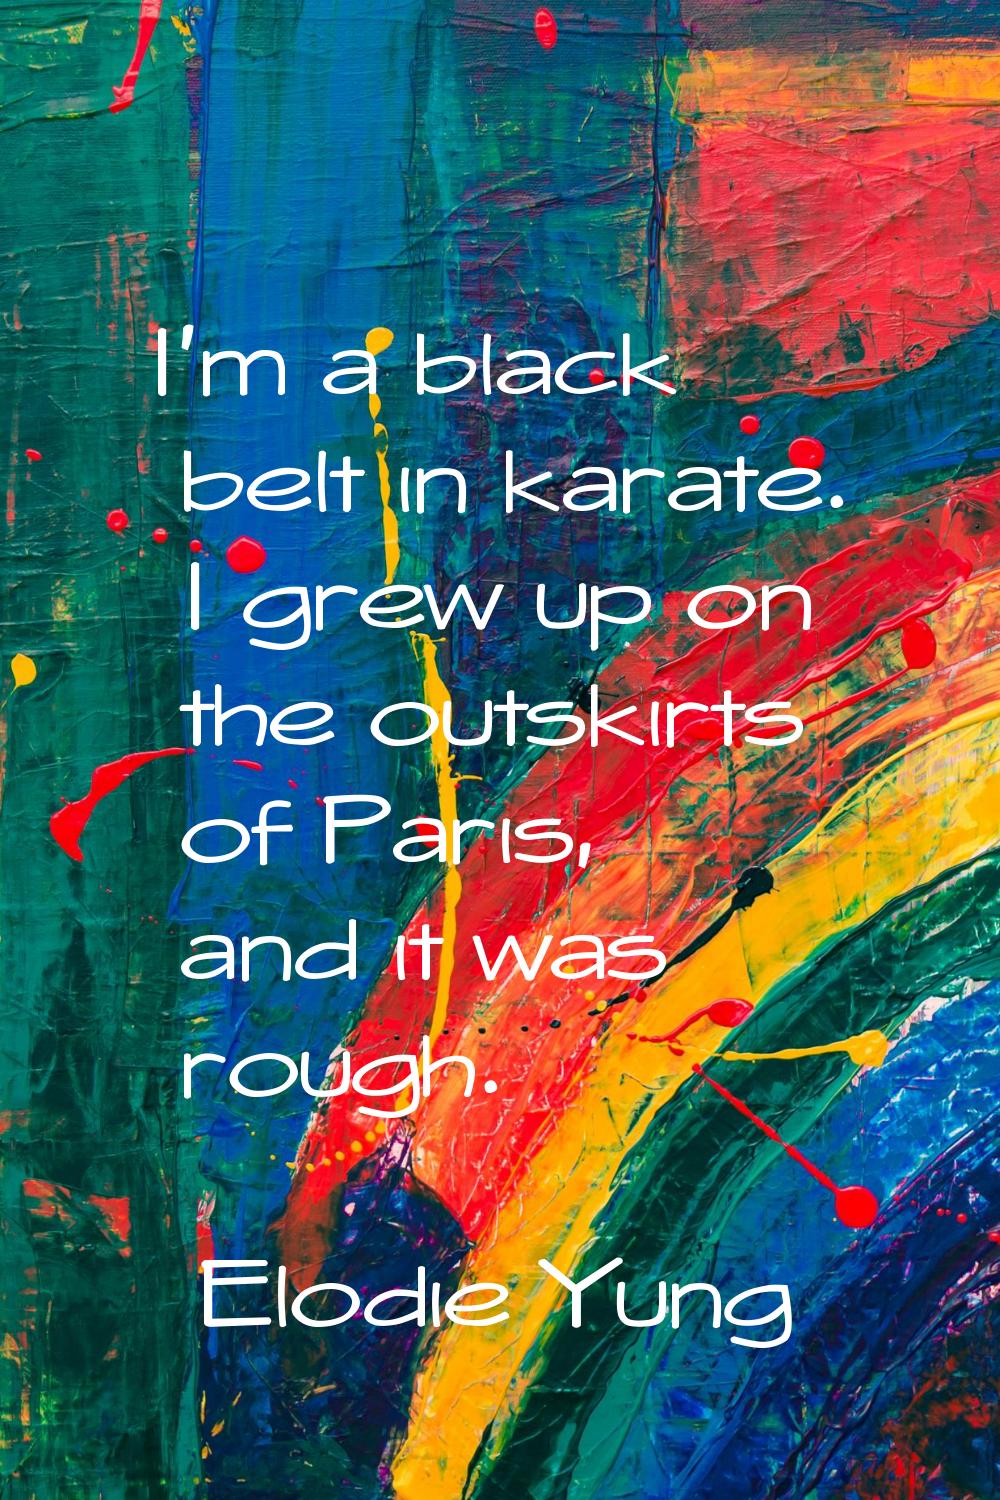 I'm a black belt in karate. I grew up on the outskirts of Paris, and it was rough.